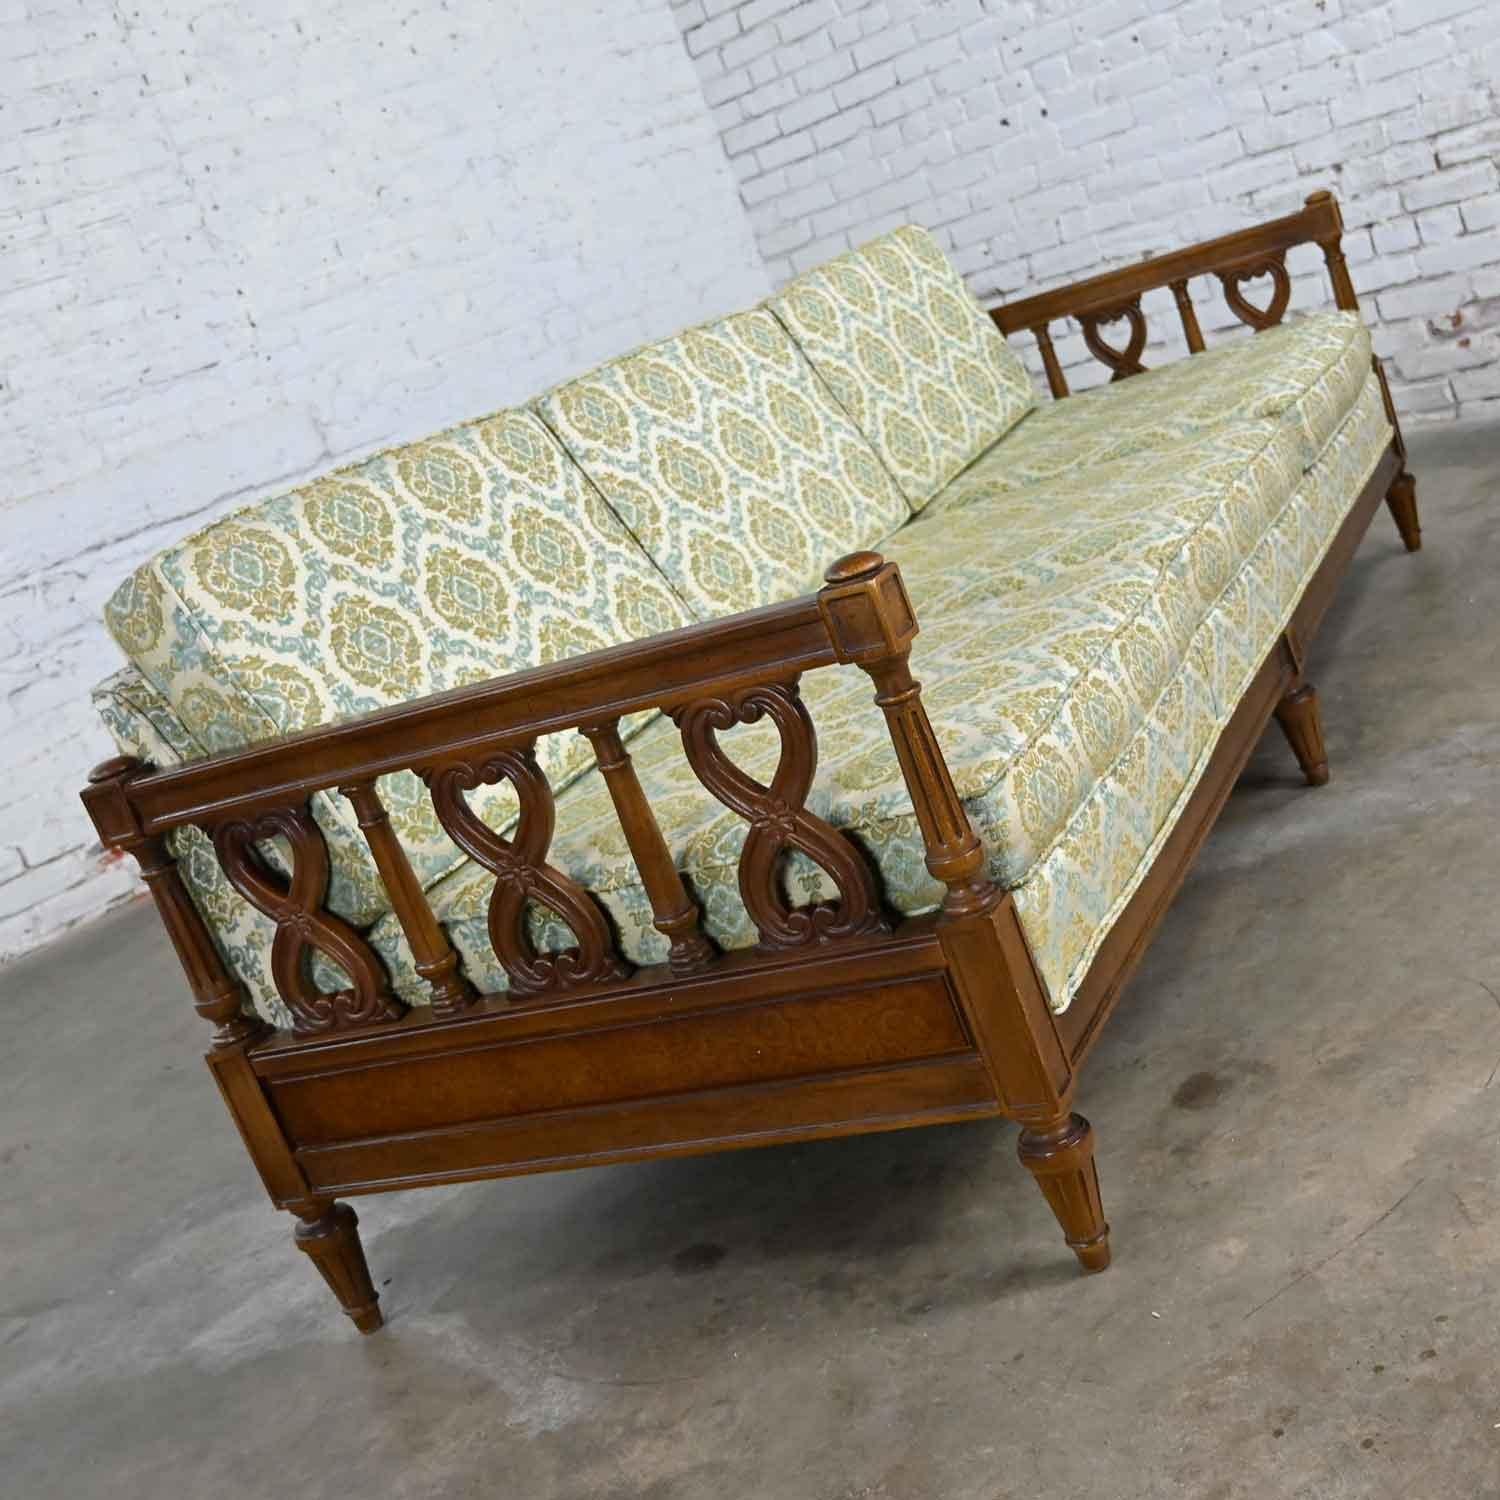 Wonderful vintage Mediterranean or Spanish Revival style sofa with pecan color finish, plastic scroll arm details, burled panels, and loose seat and back cushions in oyster white with blue & green brocade fabric by American of Martinsville.